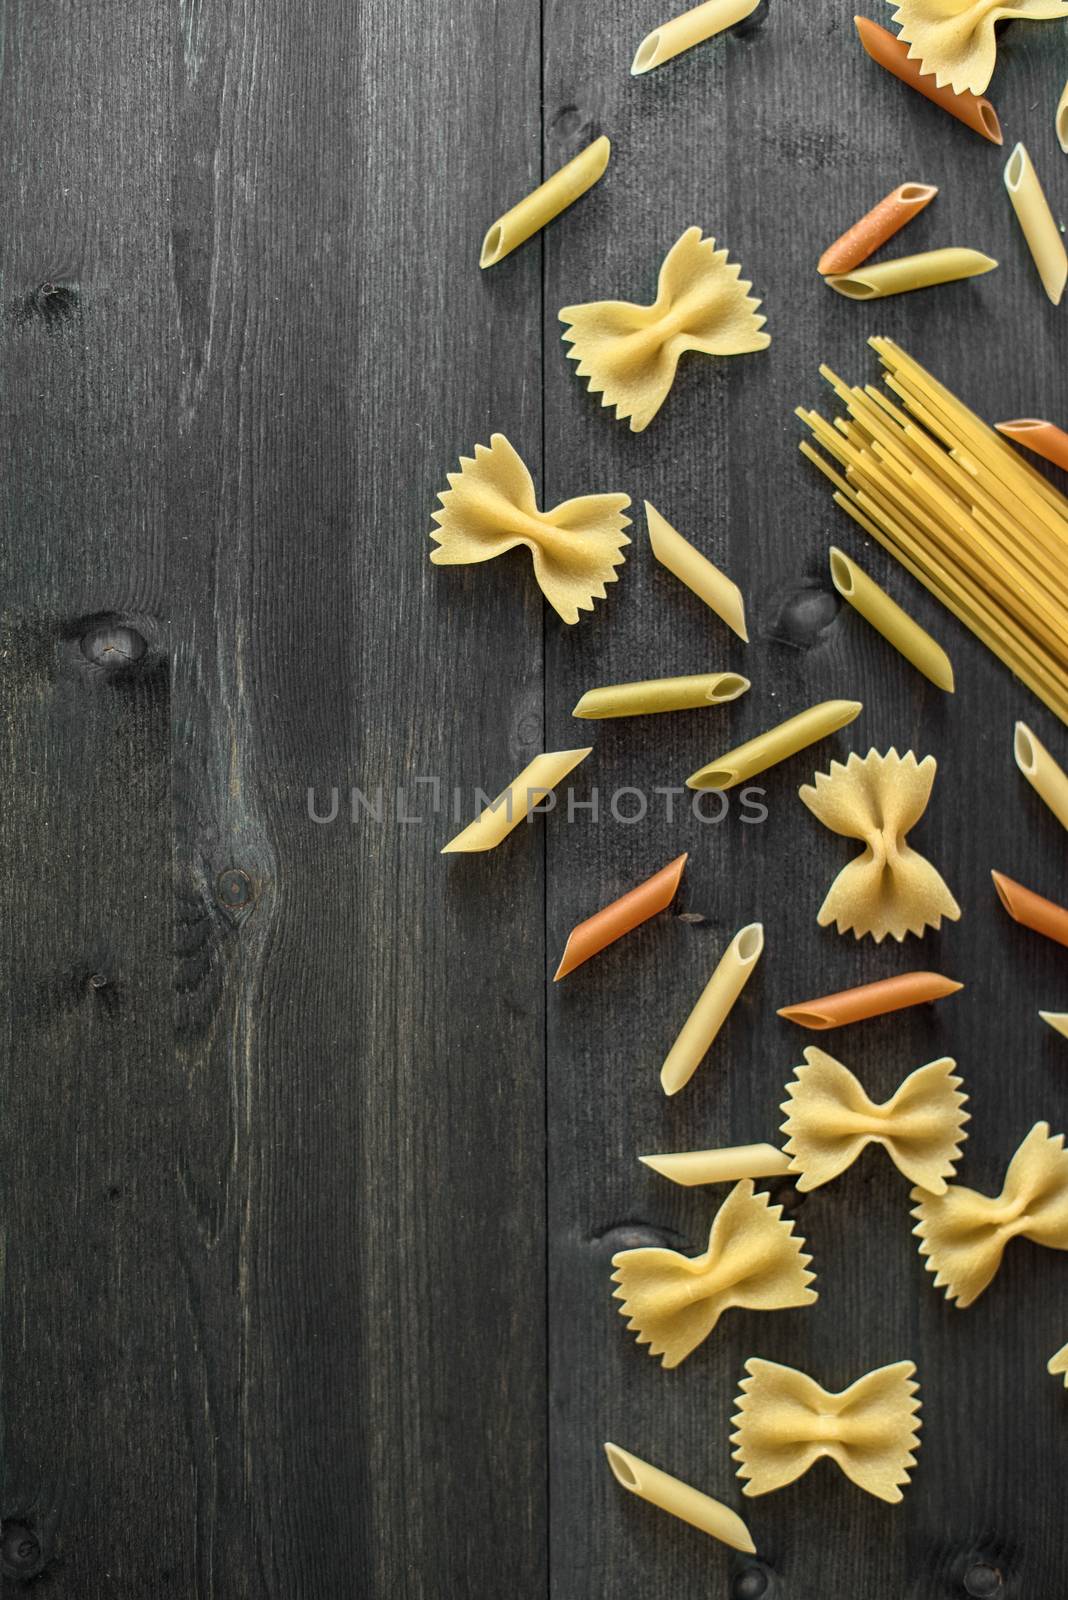 Pasta collection on rustic dark wooden background